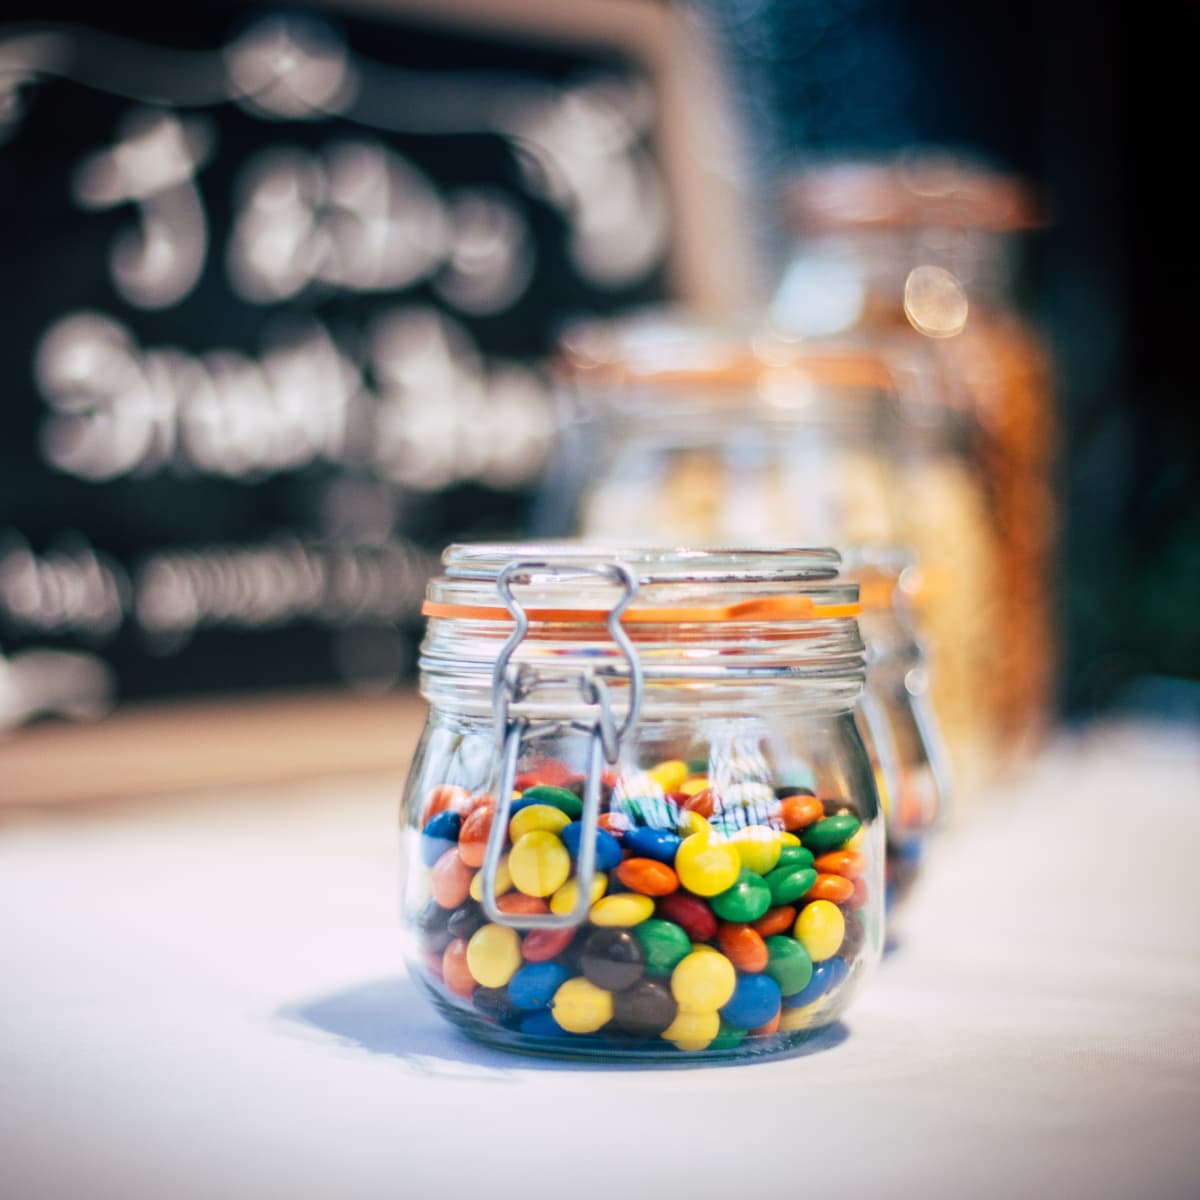 DareToShare Your Guess: How Many M&Ms and Skittles do you think are in the  jar? 